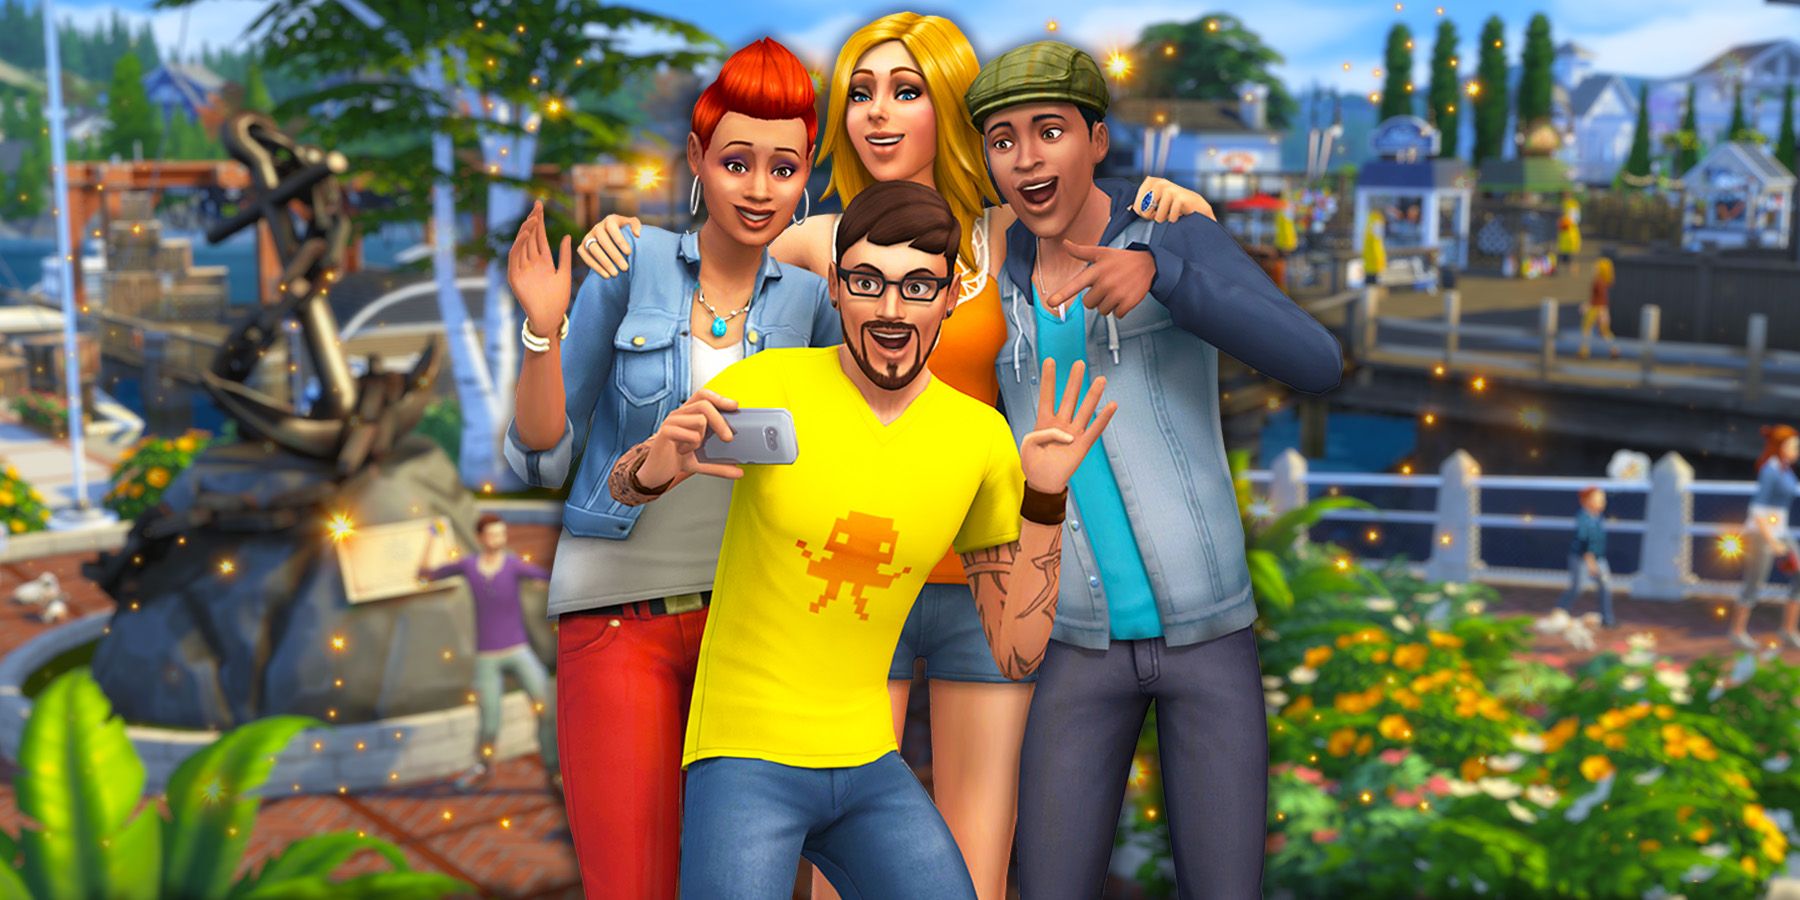 Four Sims group up for a selfie in a screenshot from The Sims 4.